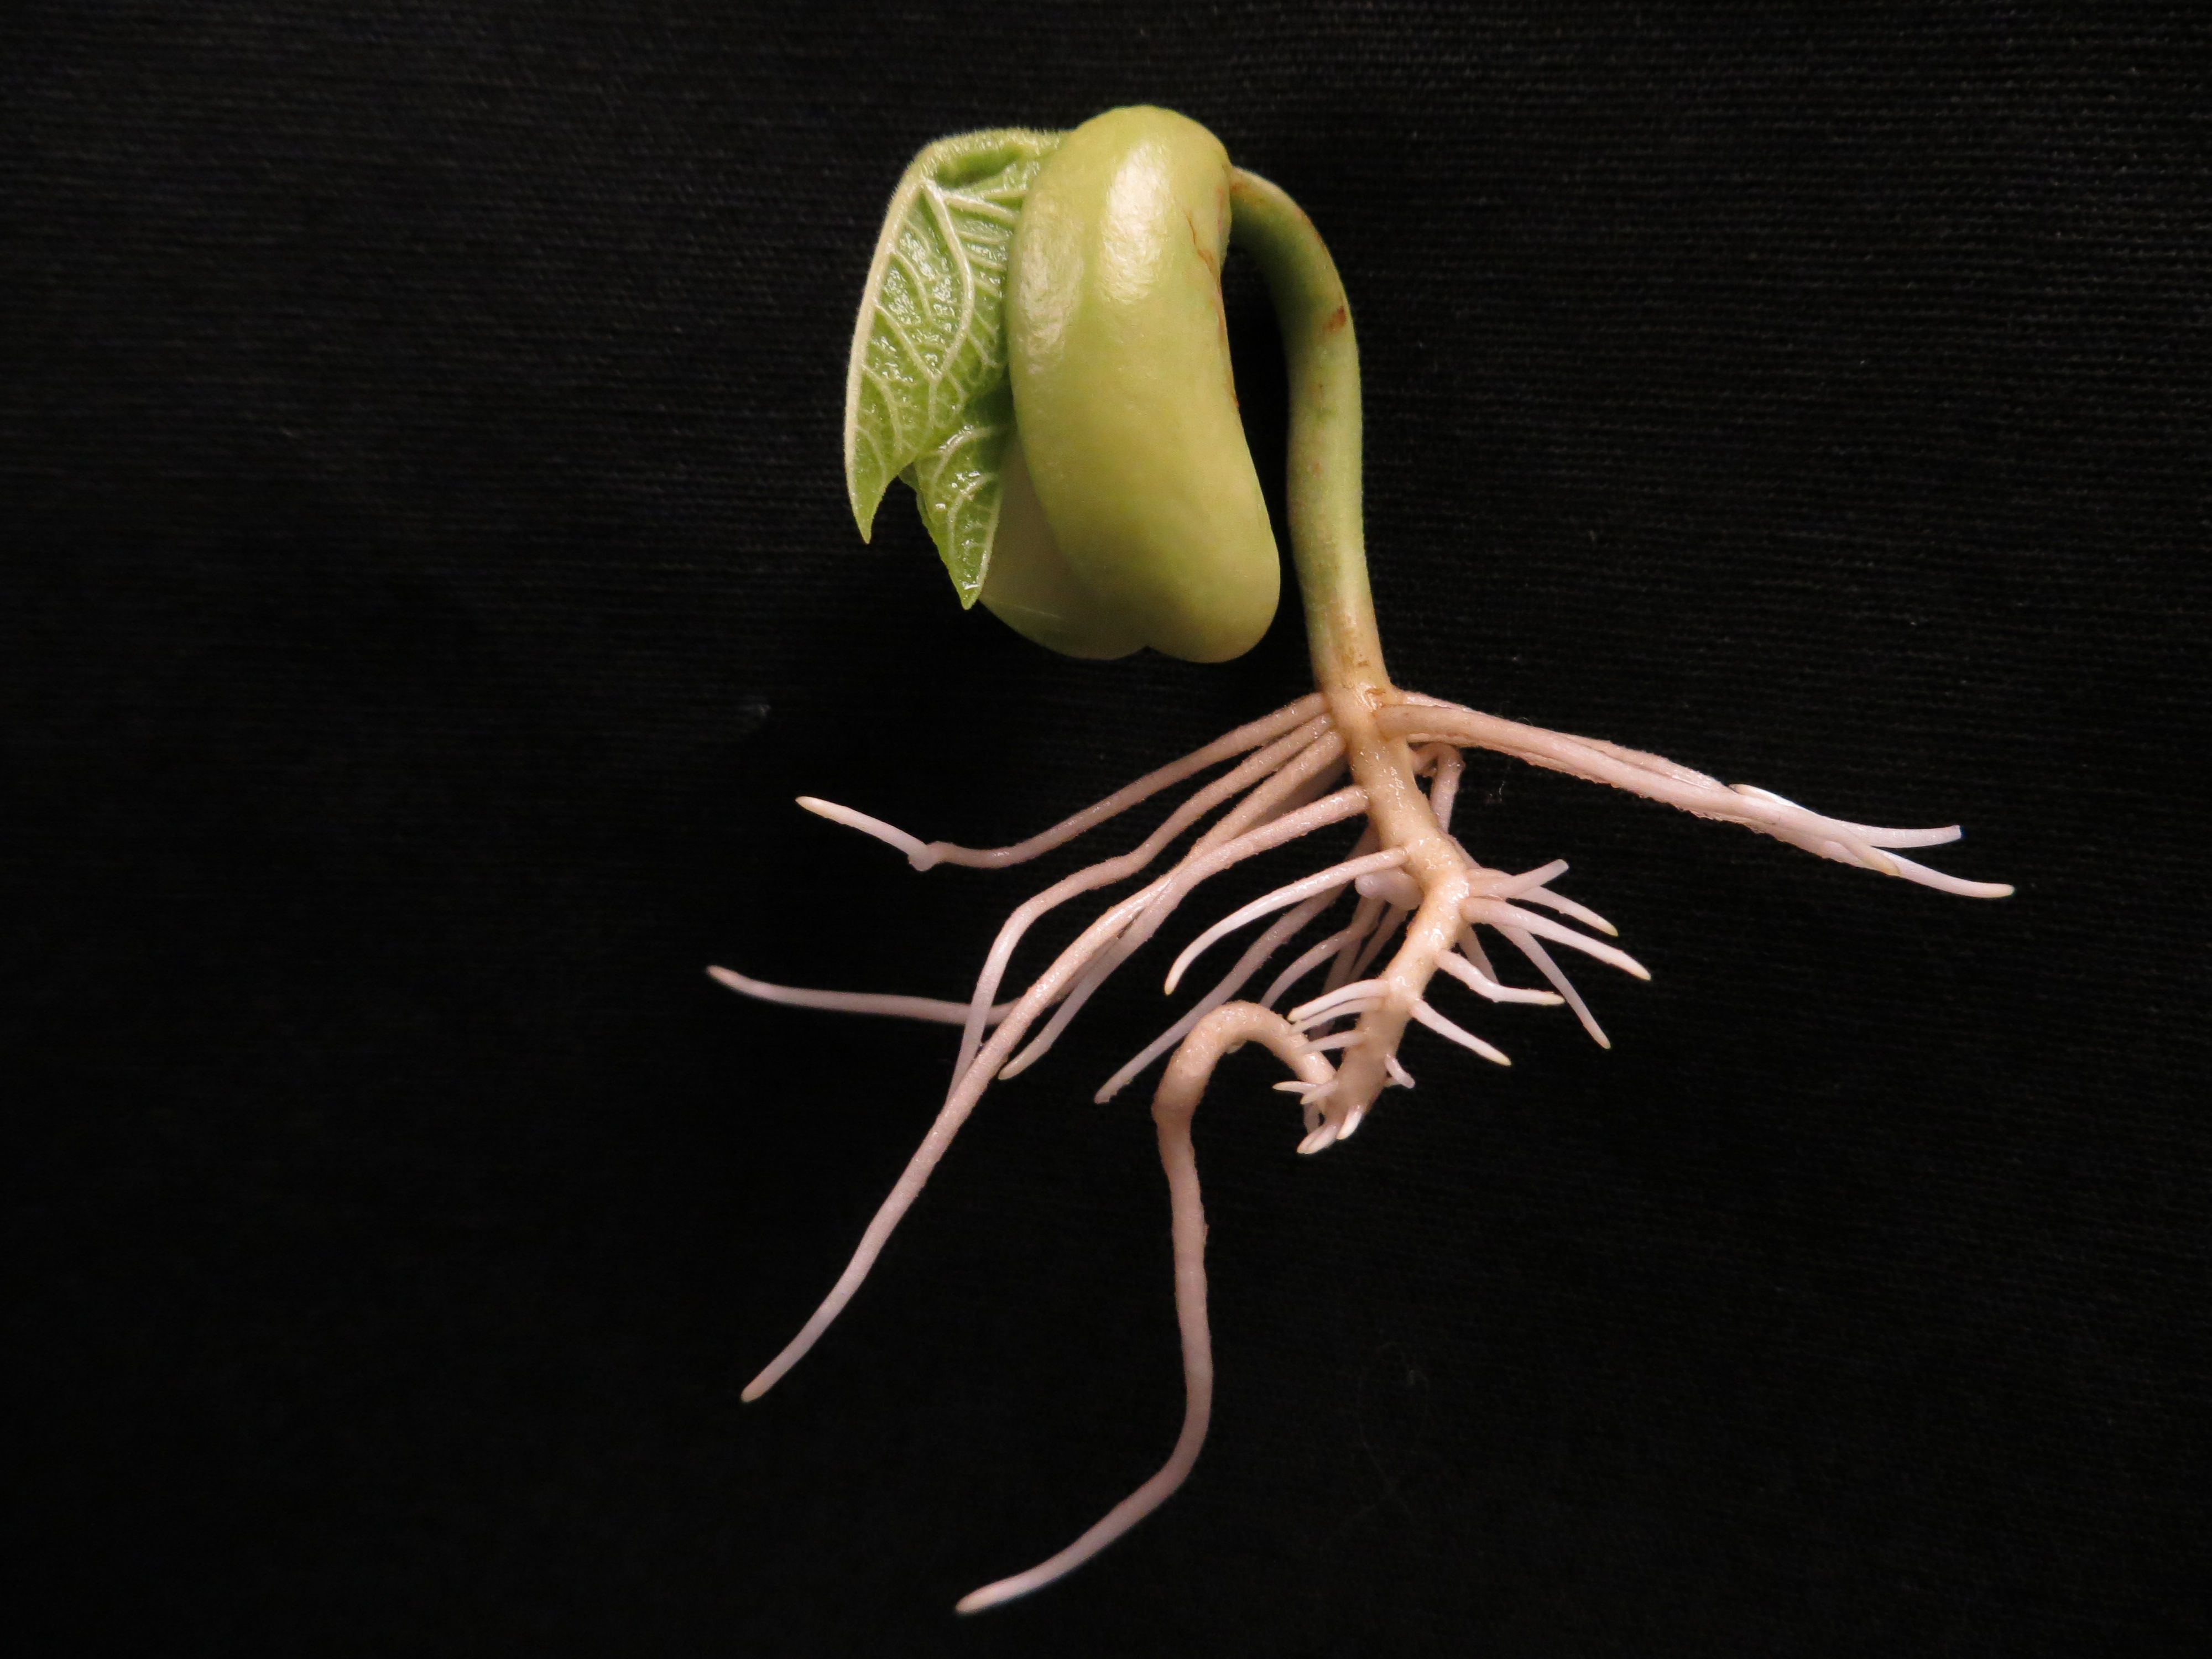 A young bean plant removed from the perlite growinng medium, showing the full plant including roots.  Credit: E.T. Paparozzi.